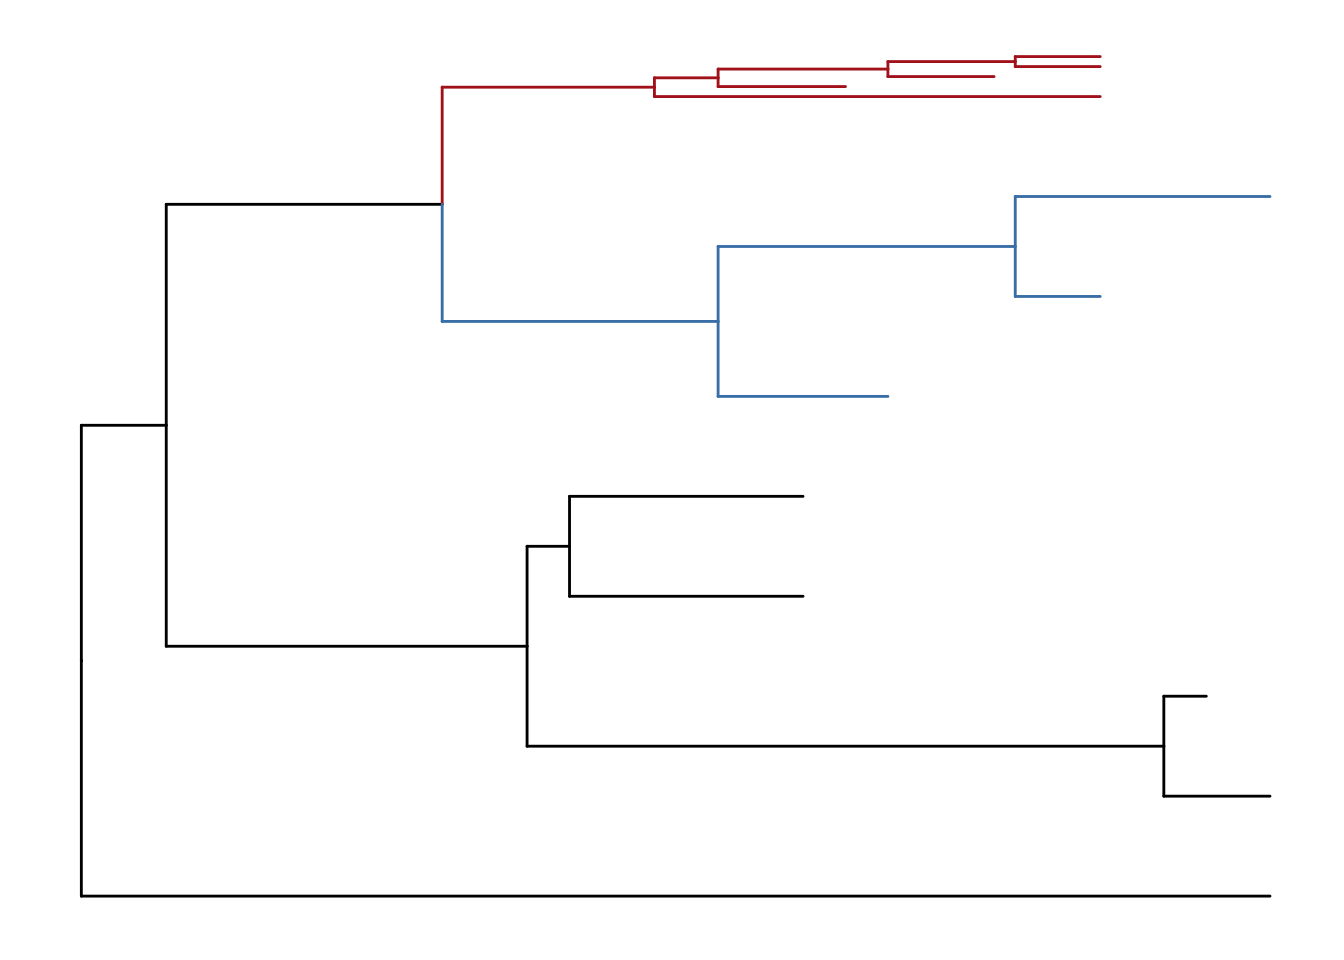 Scaling selected clade. Clades can be zoom in (if scale > 1) to highlight or zoom out to save space.